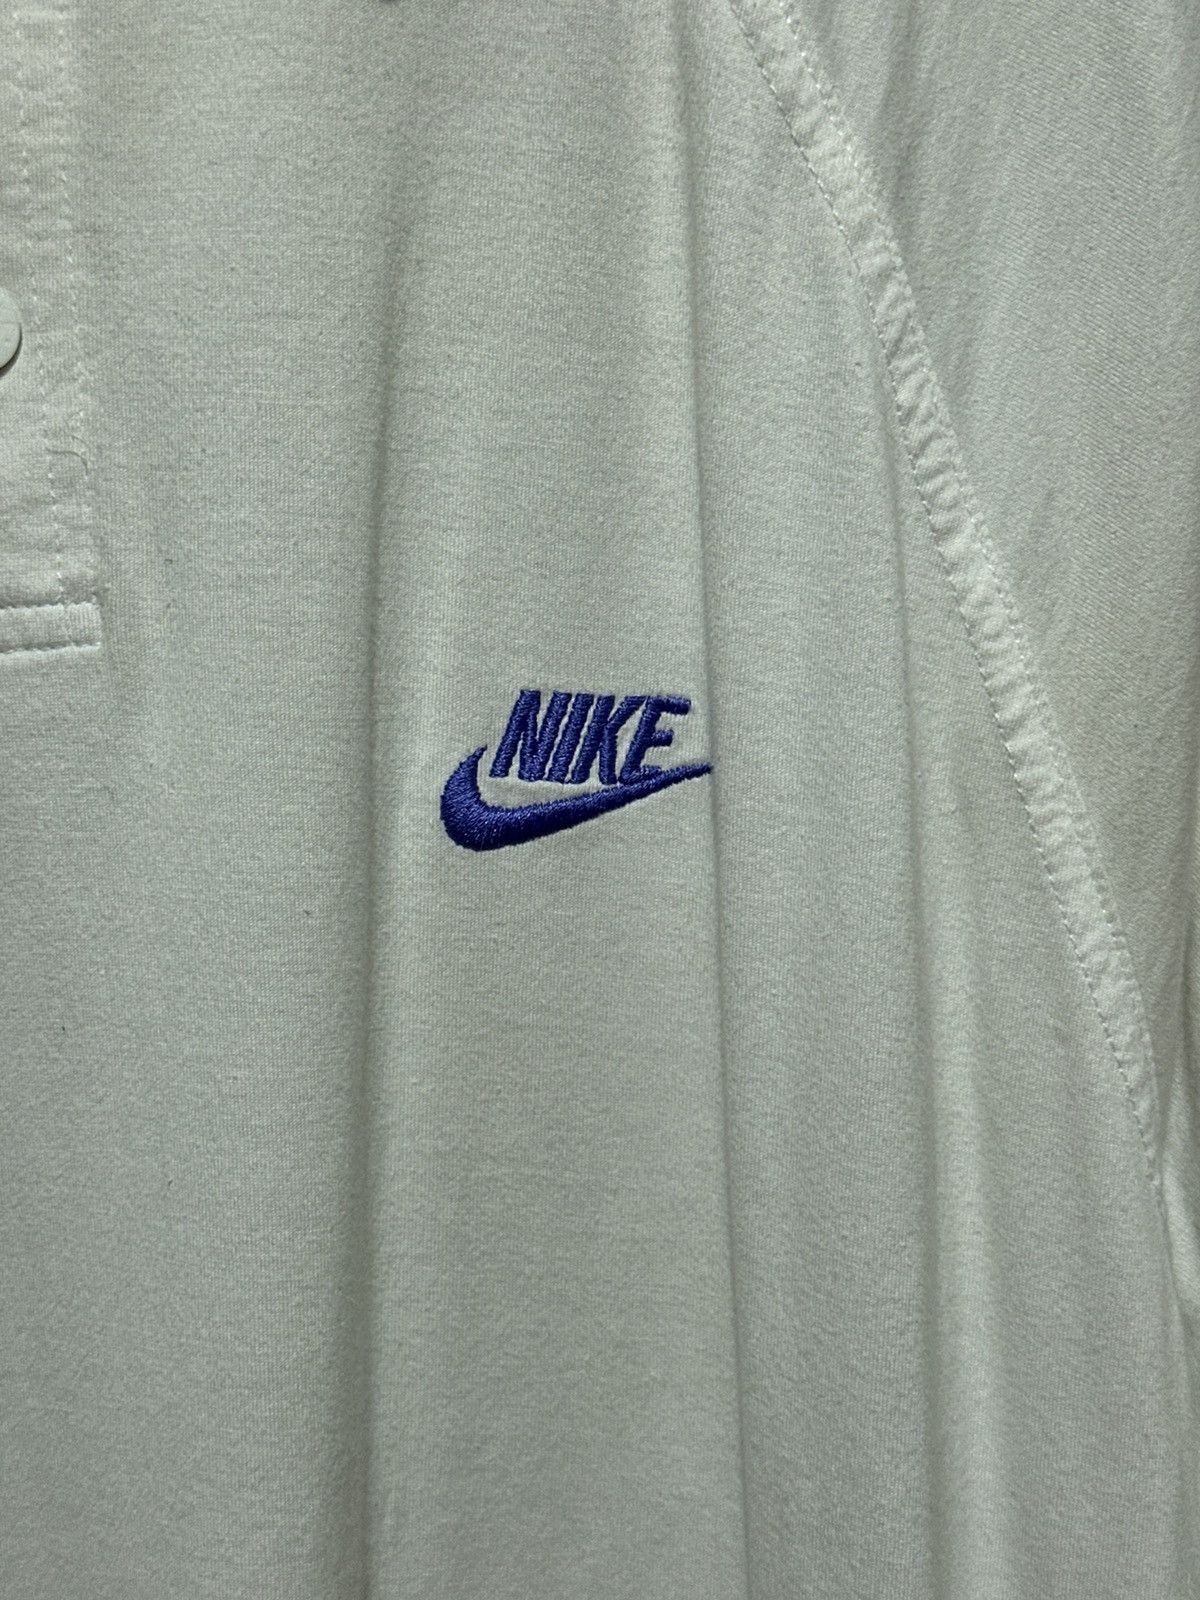 Vintage Nike Challenge Court Andre Agassi Polo Shirt LARGE - 3